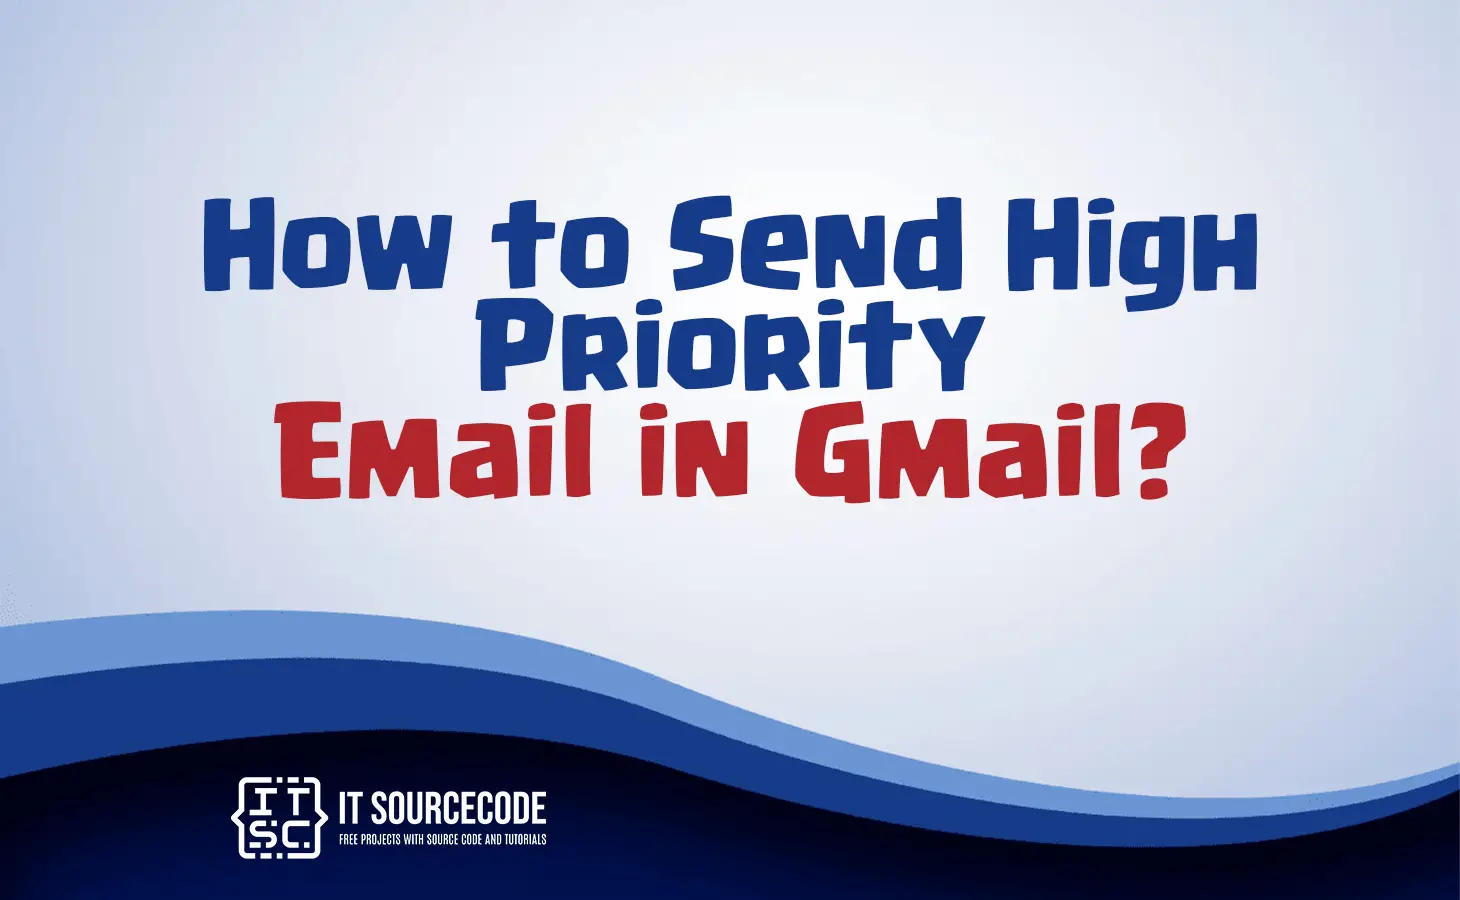 how to send high priority email in gmail